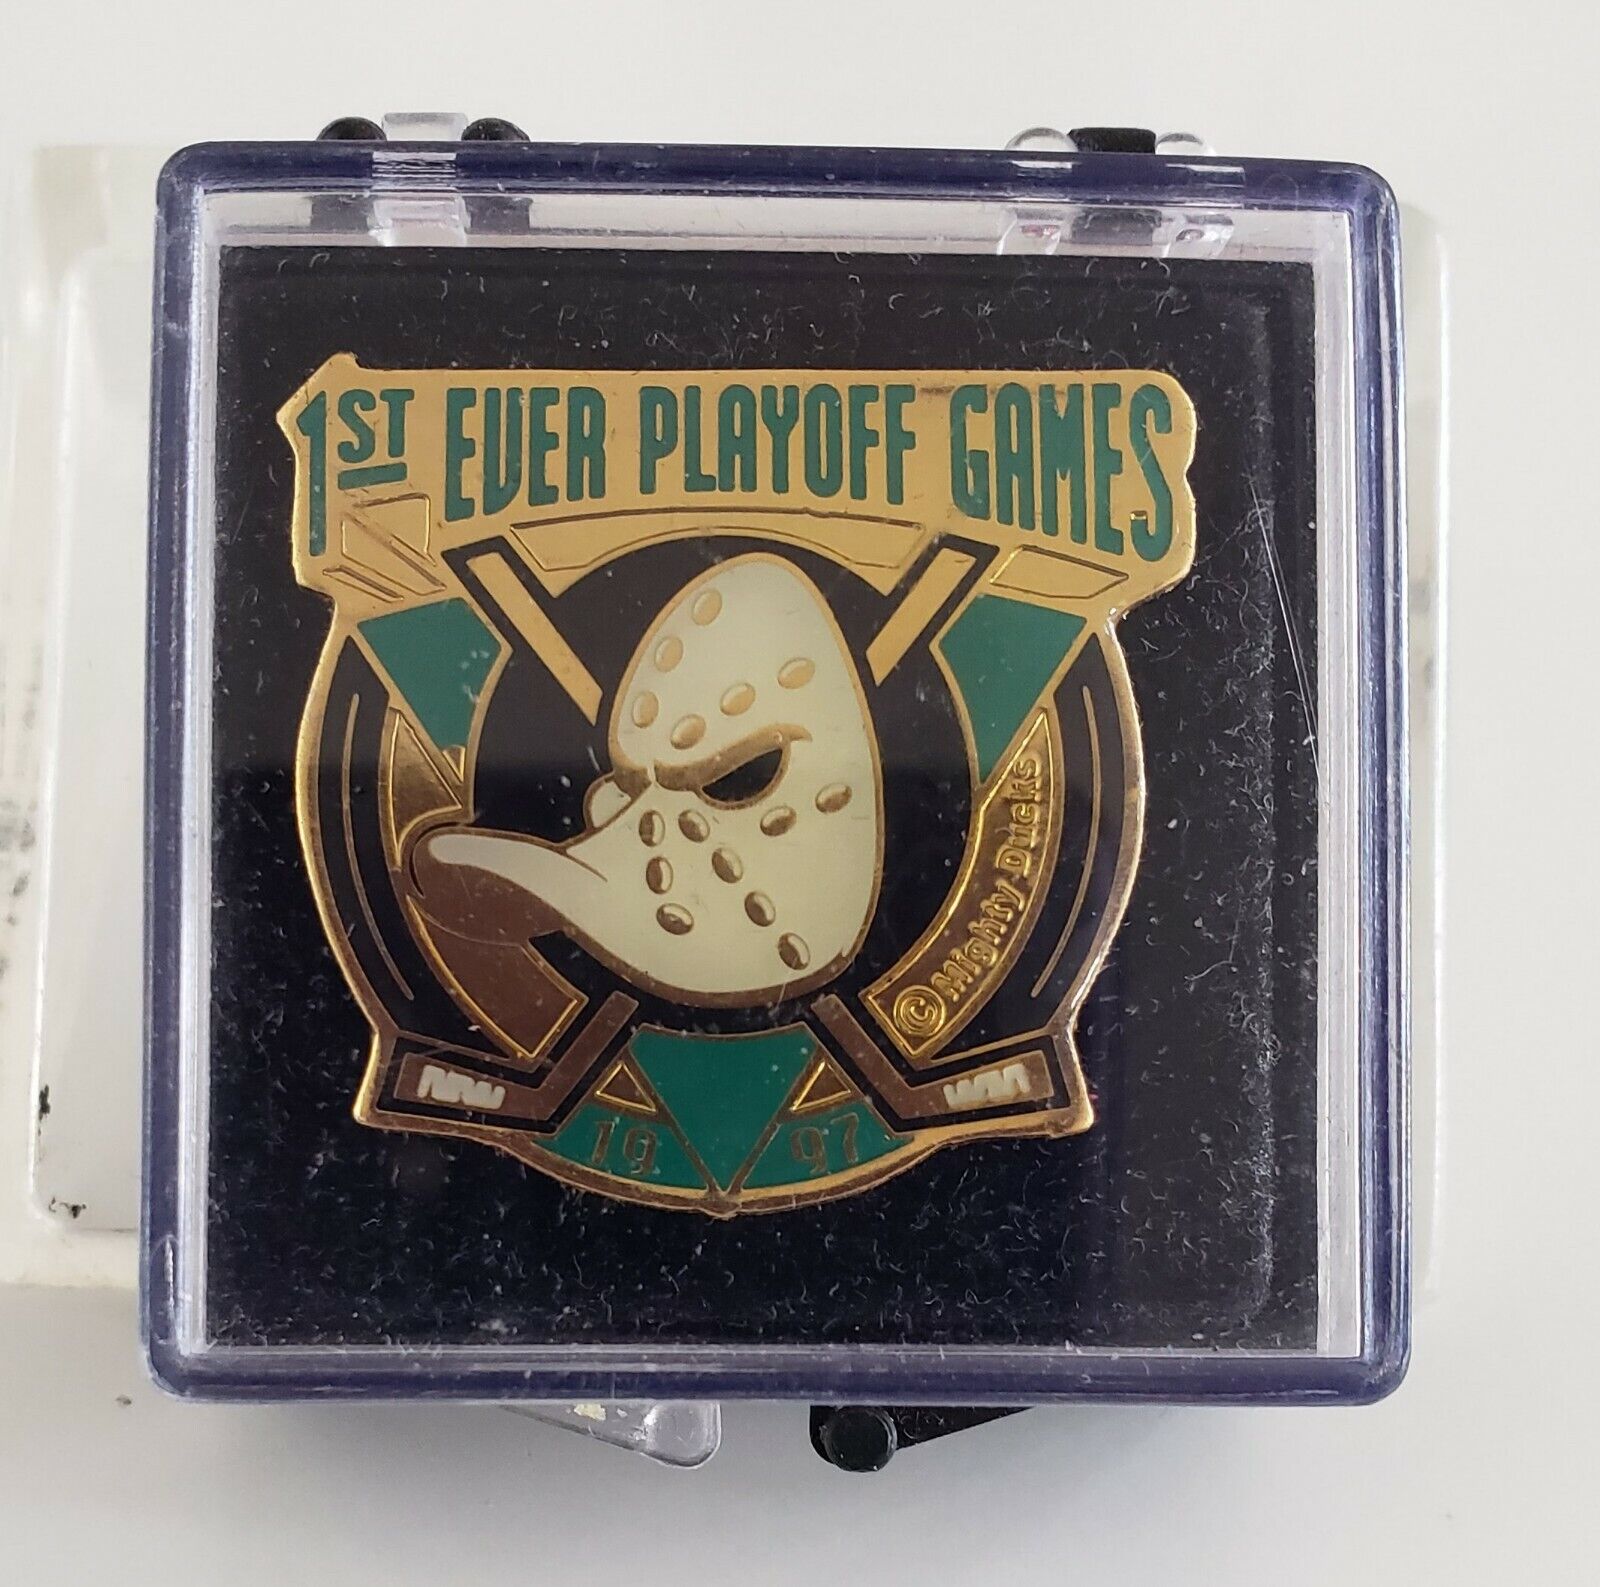 NHL/DISNEY ANAHEIM MIGHTY DUCKS 1ST EVER PLAYOFFS GAME 1997 PIN-FREE SHIPPING